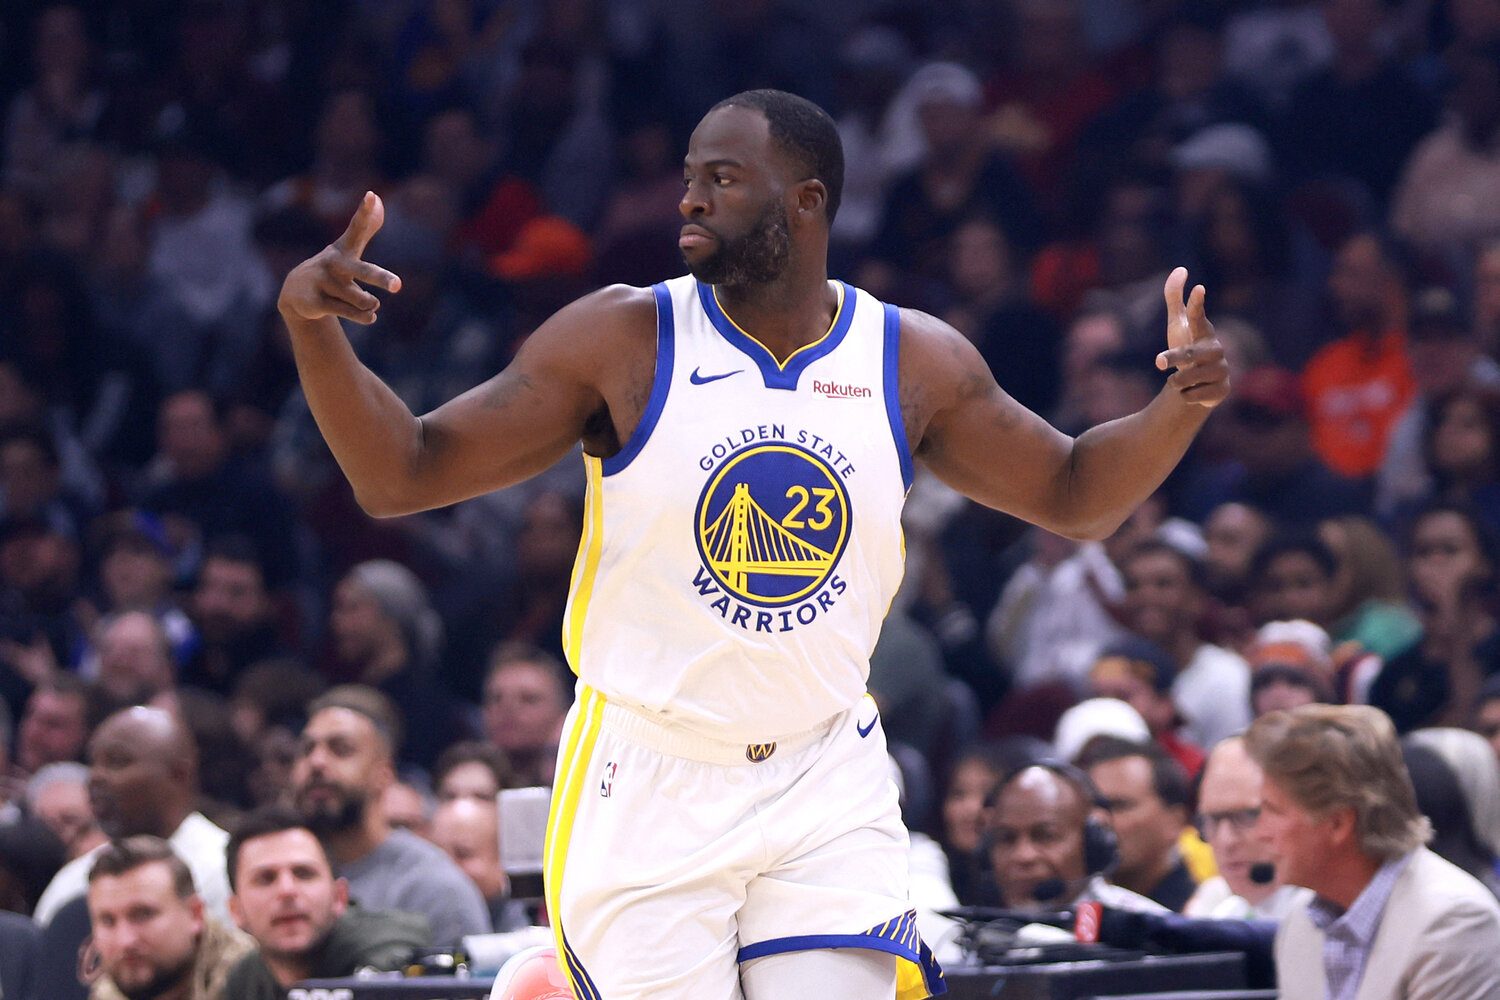 7 times Draymond Green kicked someone on a basketball court